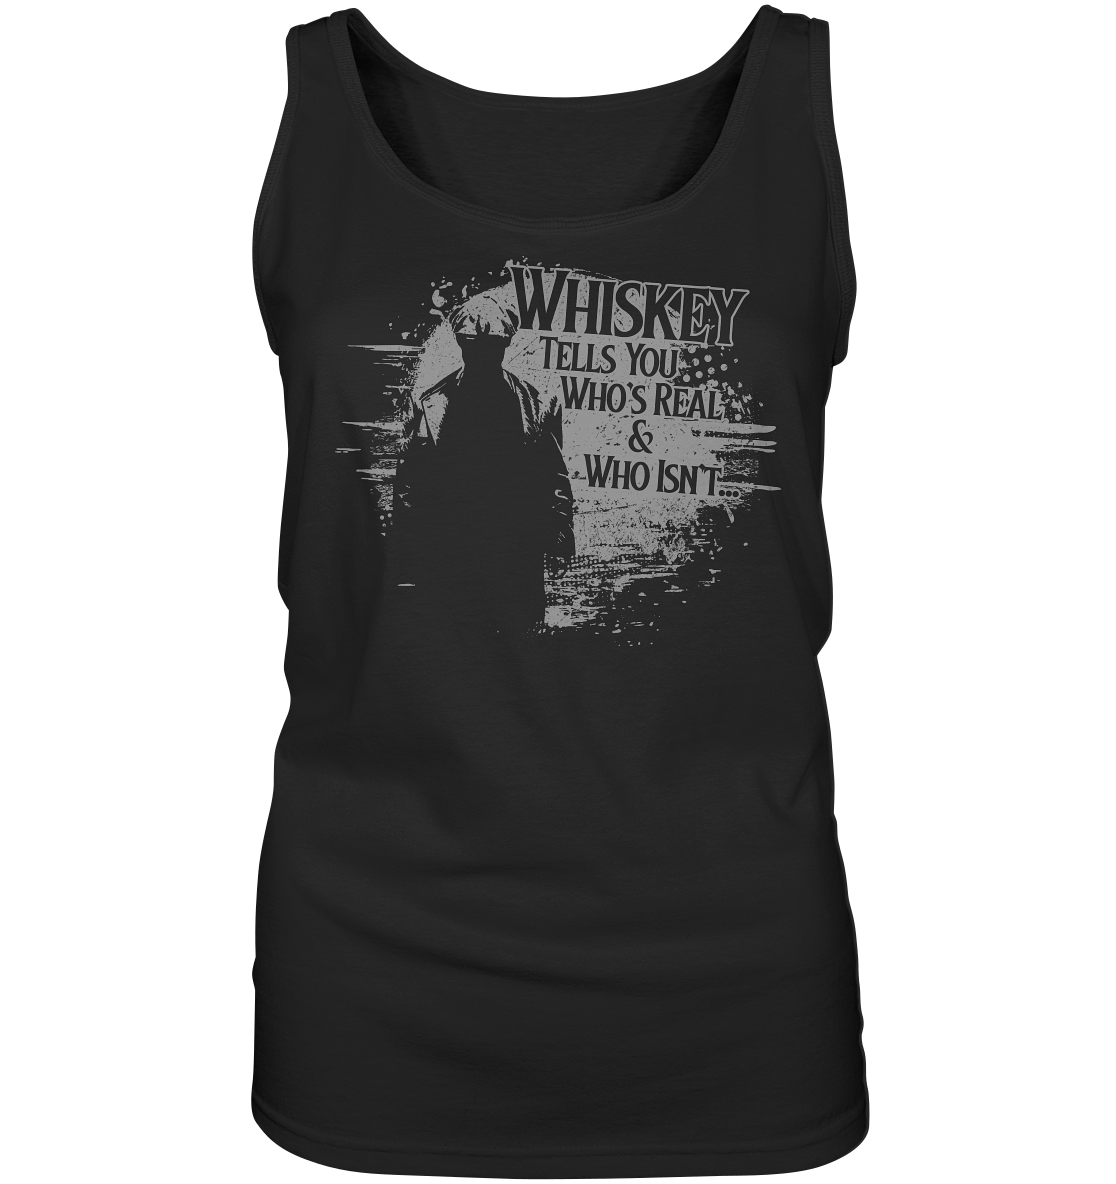 Whiskey Tells You Who's Real & Who Isn't - Ladies Tank-Top